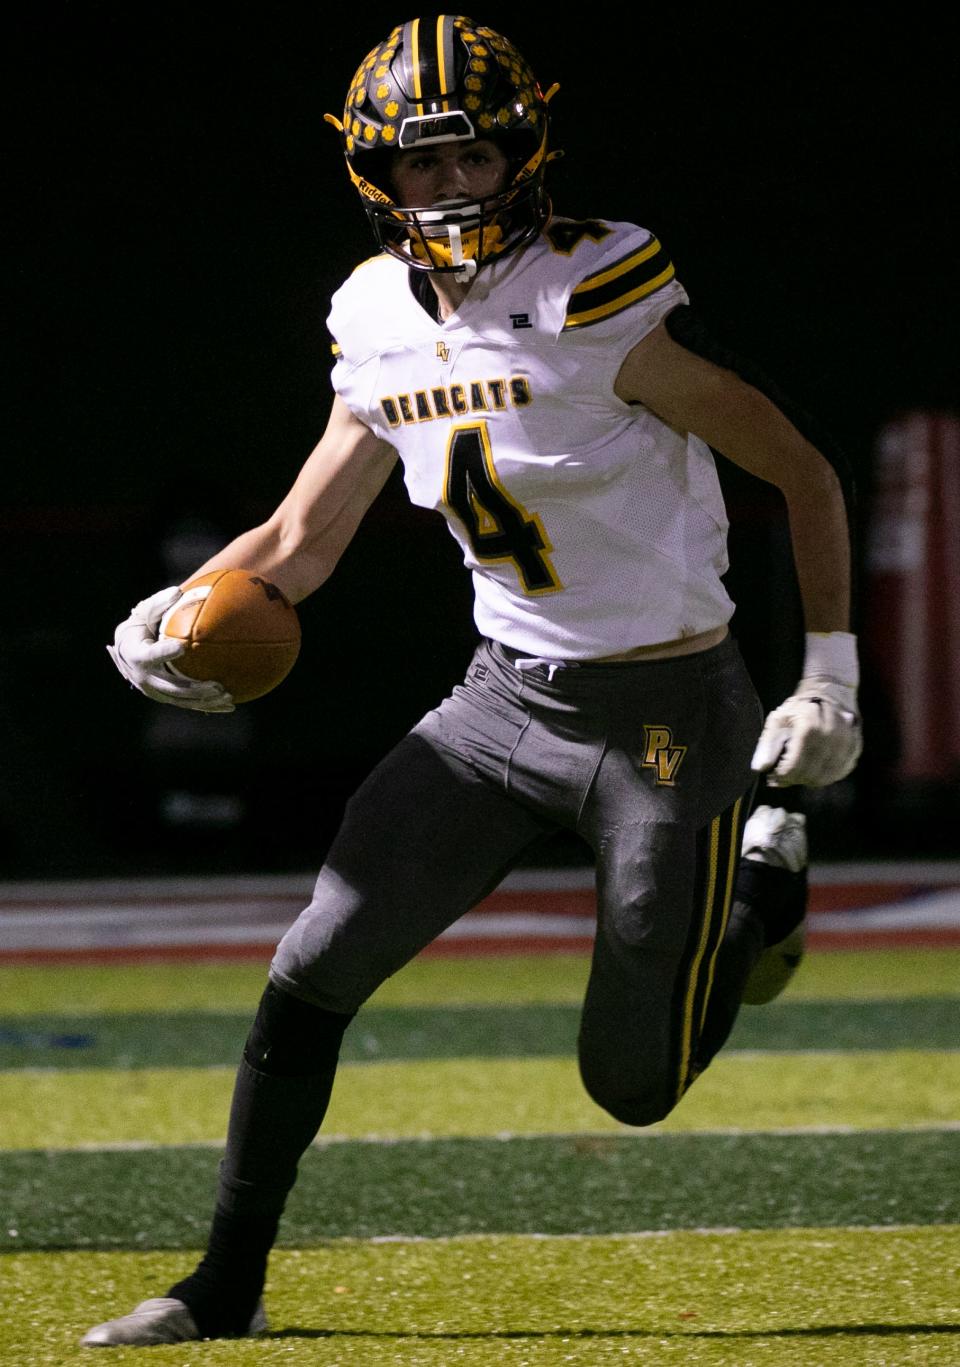 Paint Valley's Carson Free was named to the All-Ohio Division VI Football Third Team.